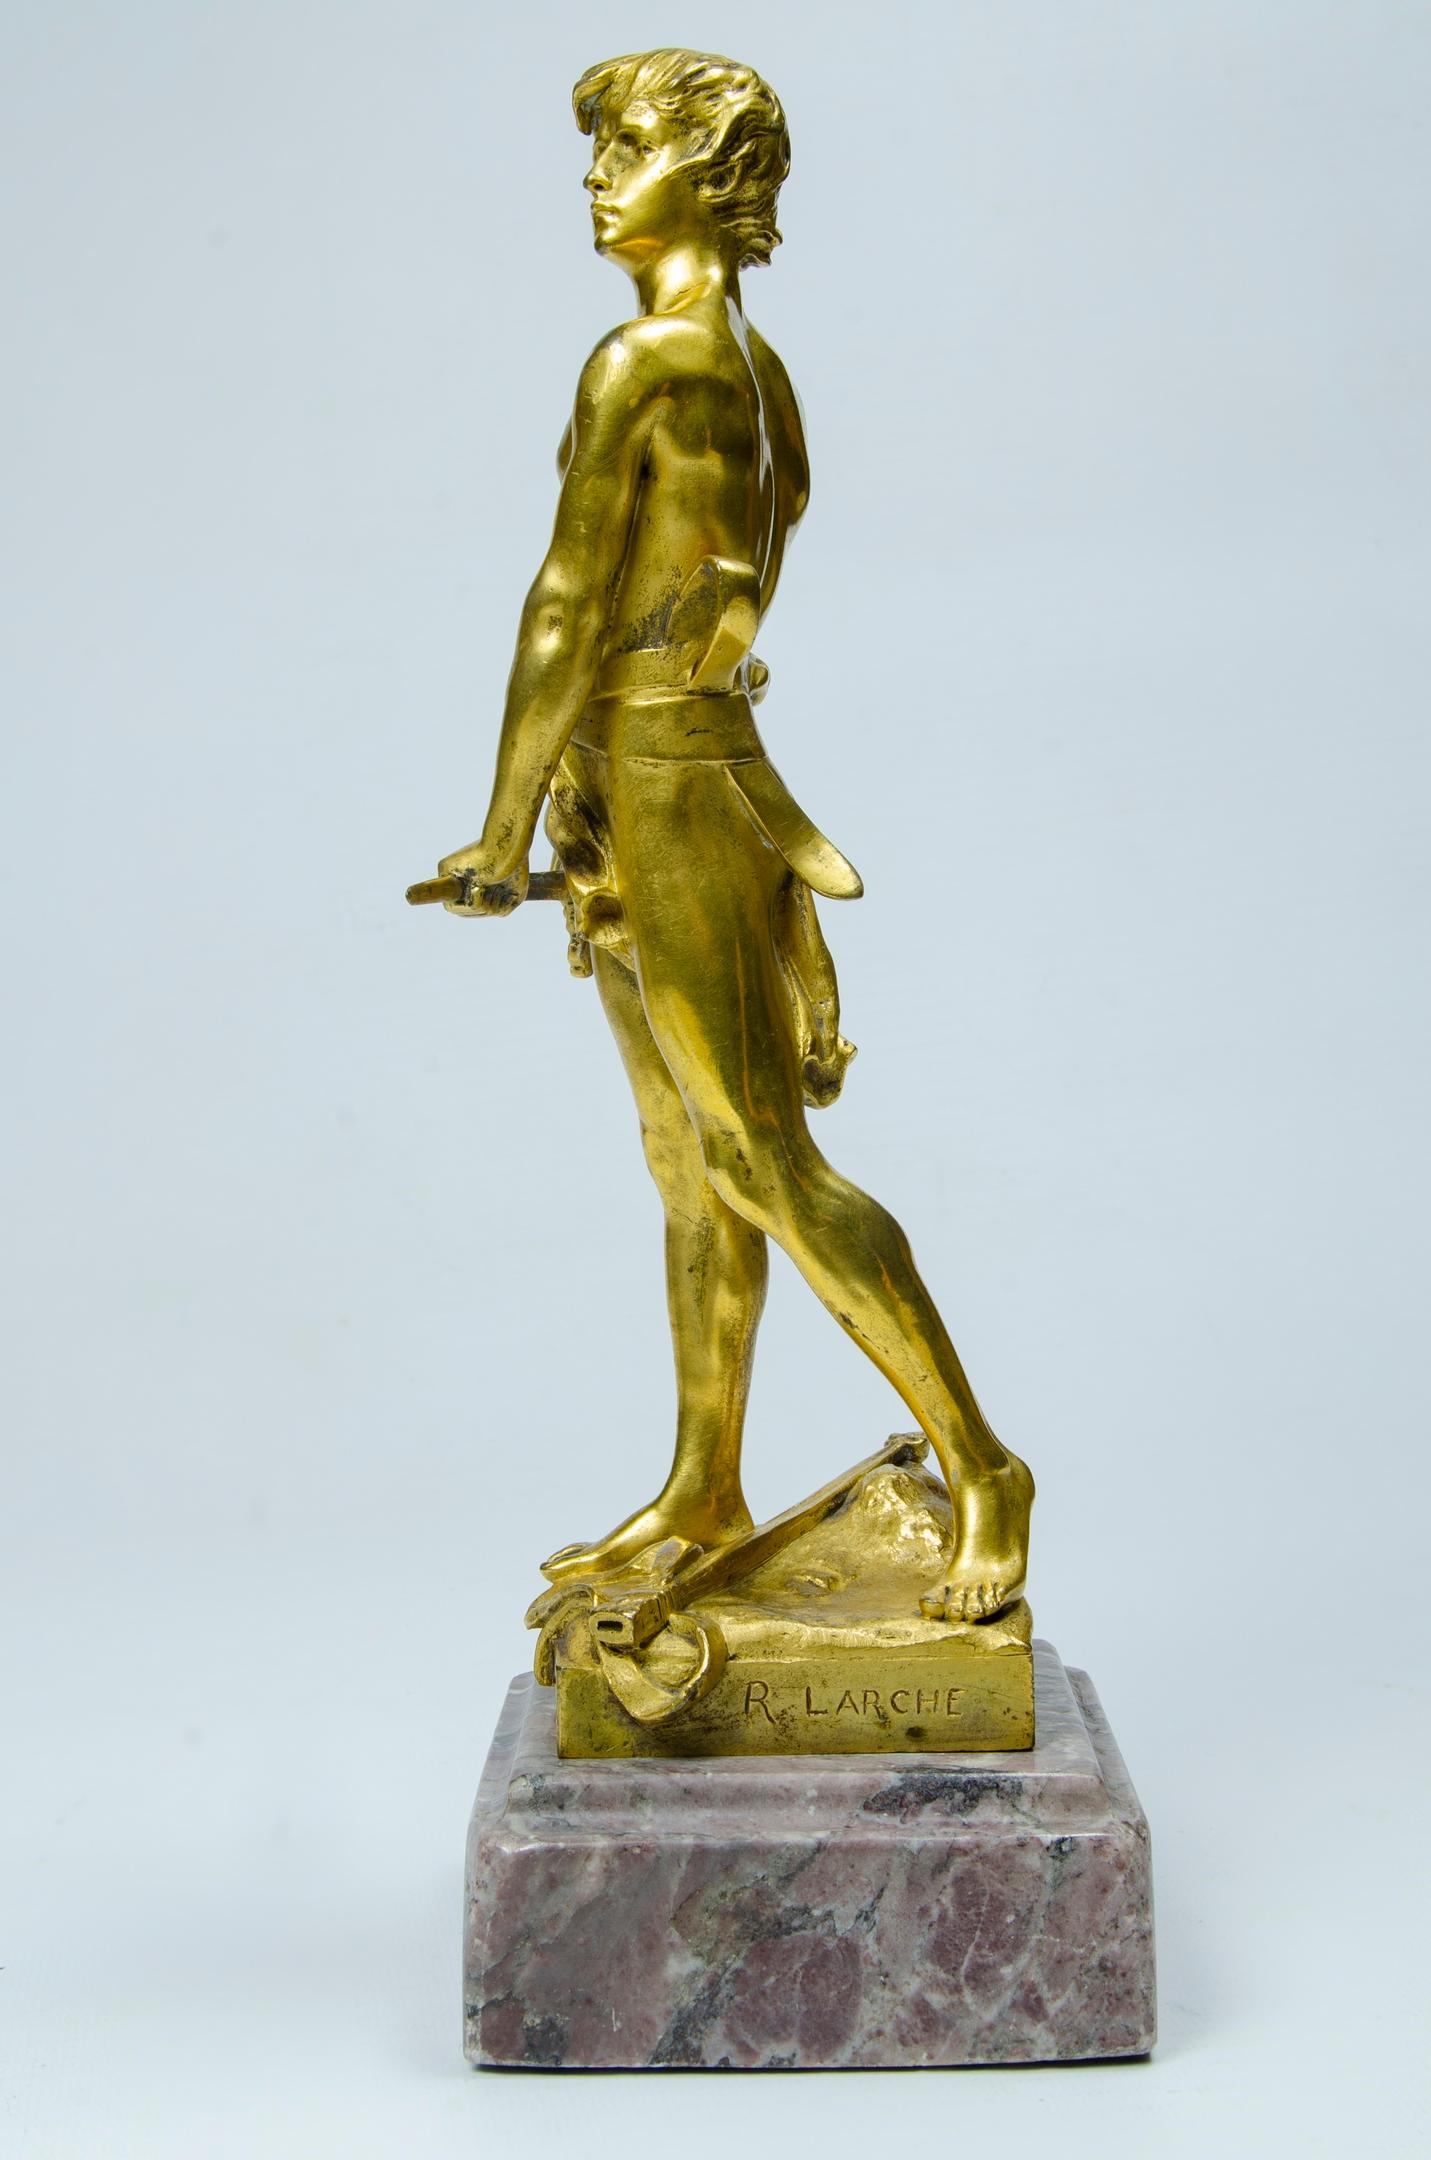 Raul Larche bronze cast Siot Decaville
Raul Larche 1860-1912
Title: The 20 years
golden patina natural wear.